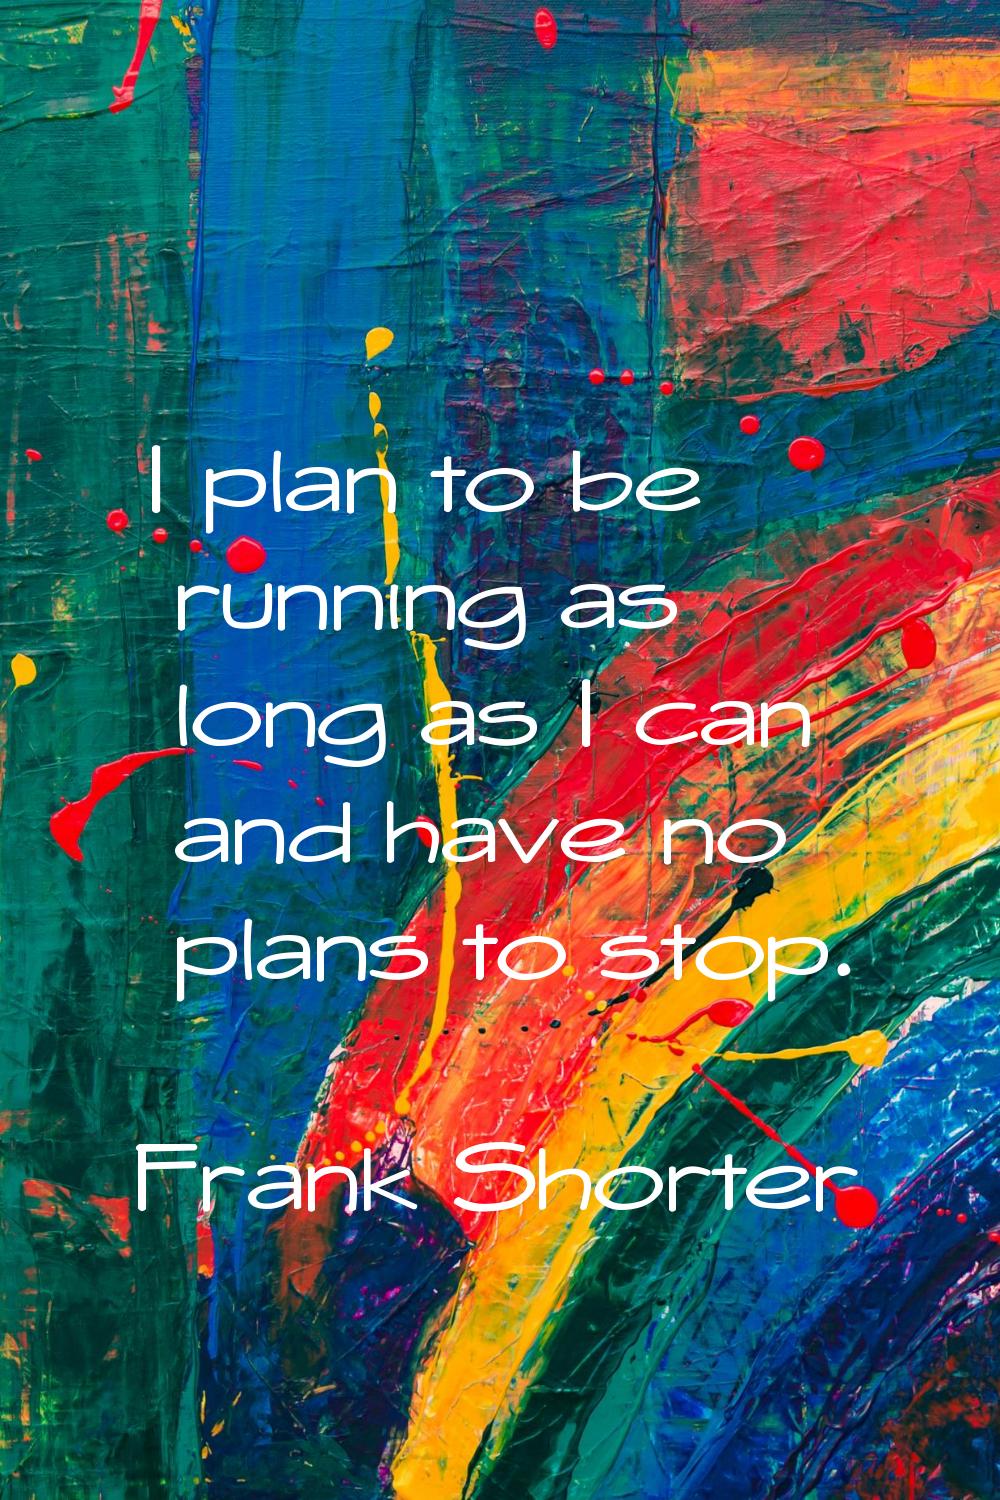 I plan to be running as long as I can and have no plans to stop.